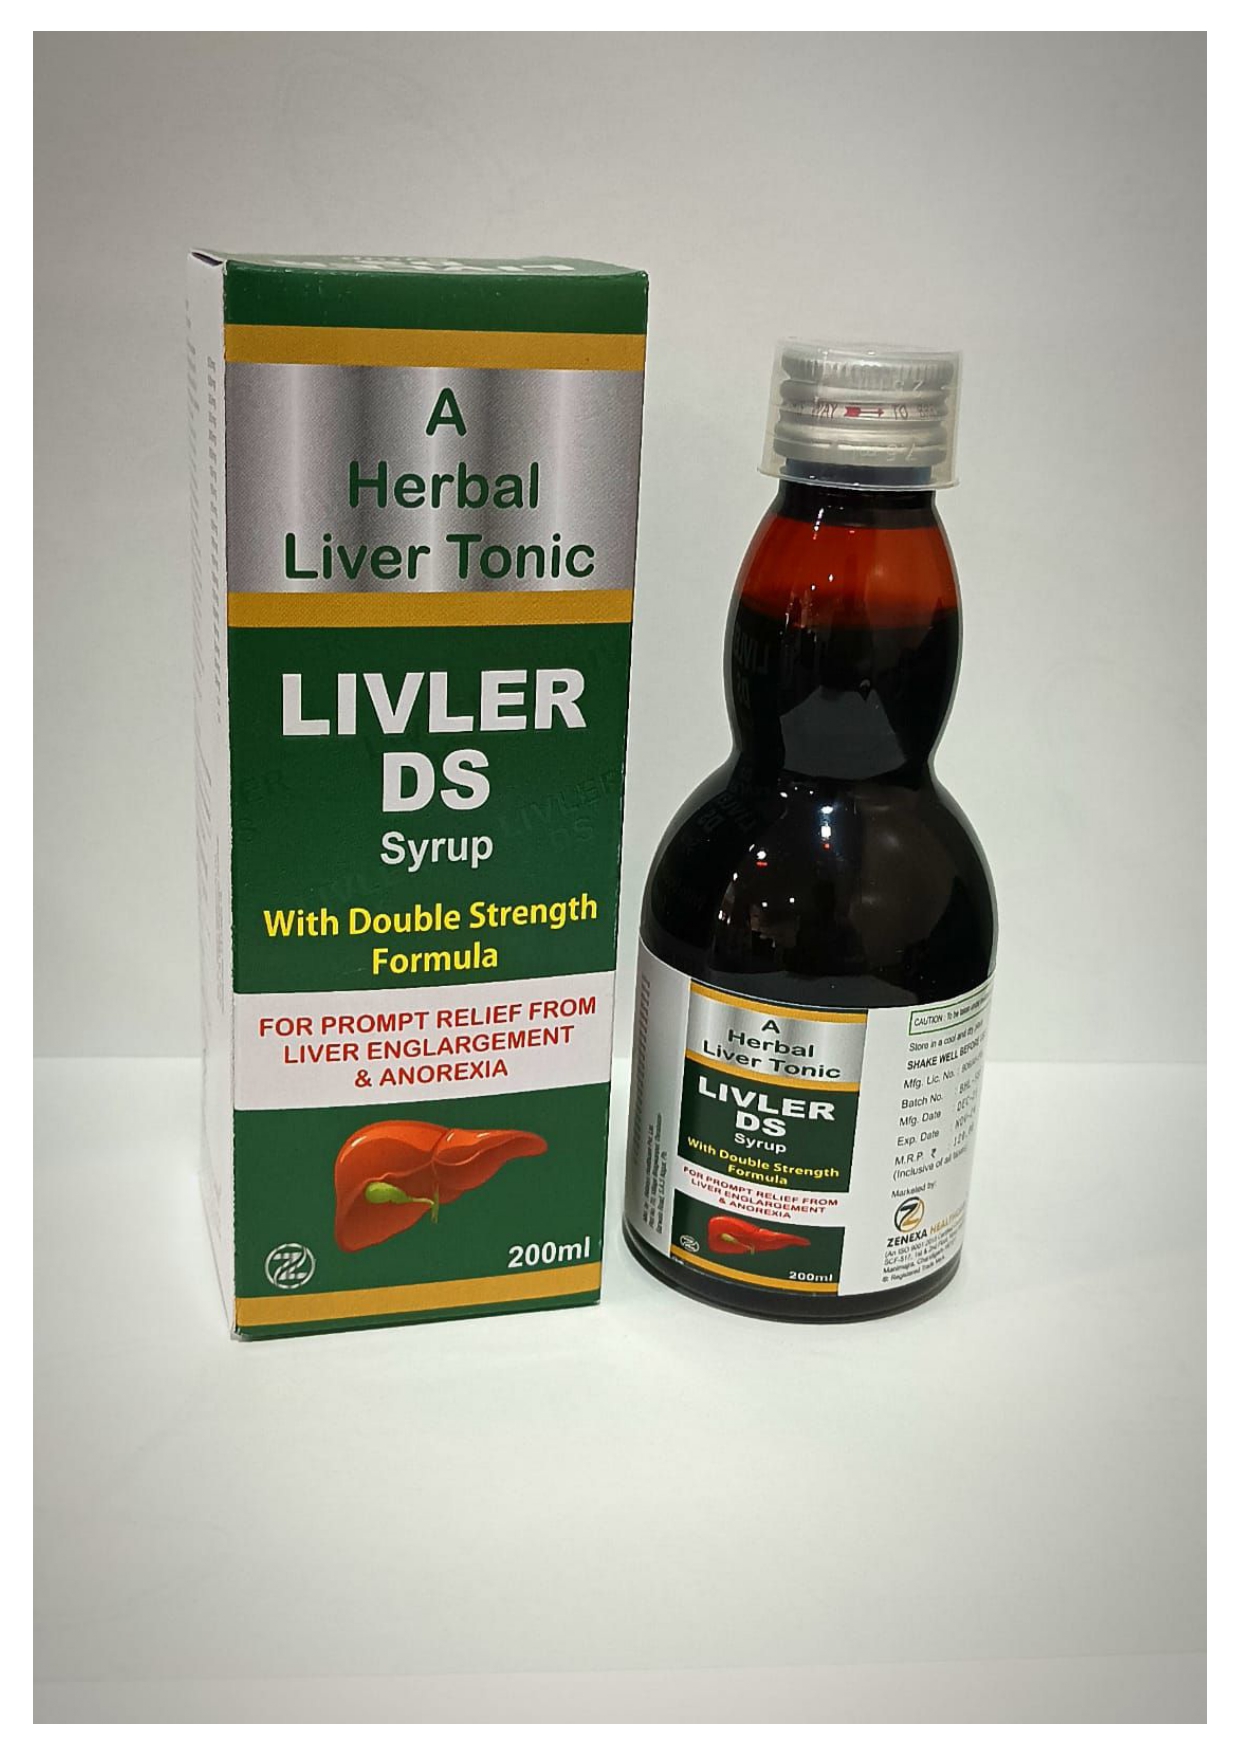 ayurvedic liver tonic with double strenth formula